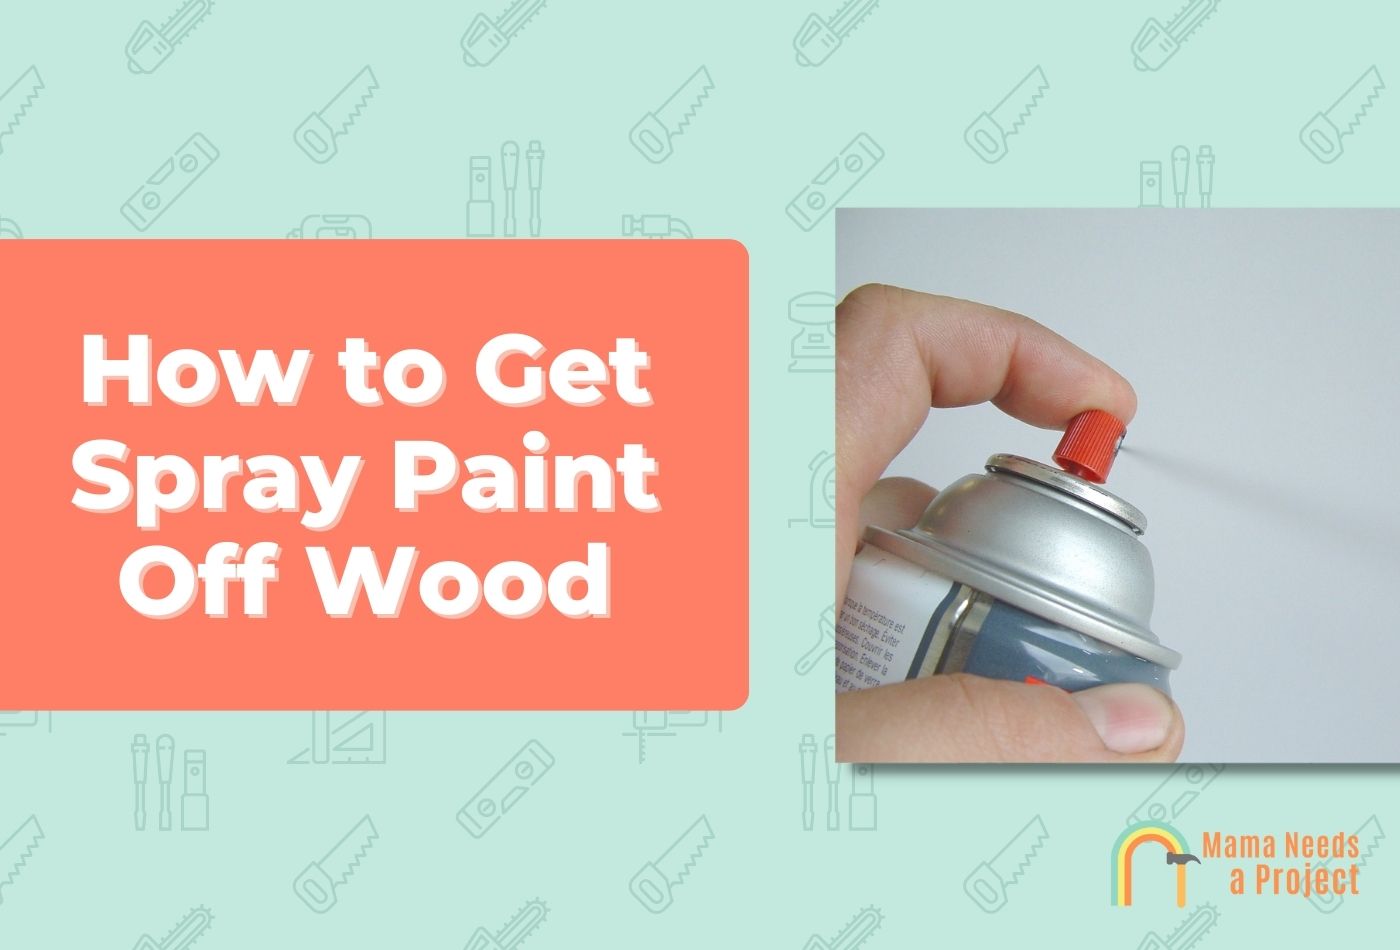 How to Get Spray Paint Off Wood